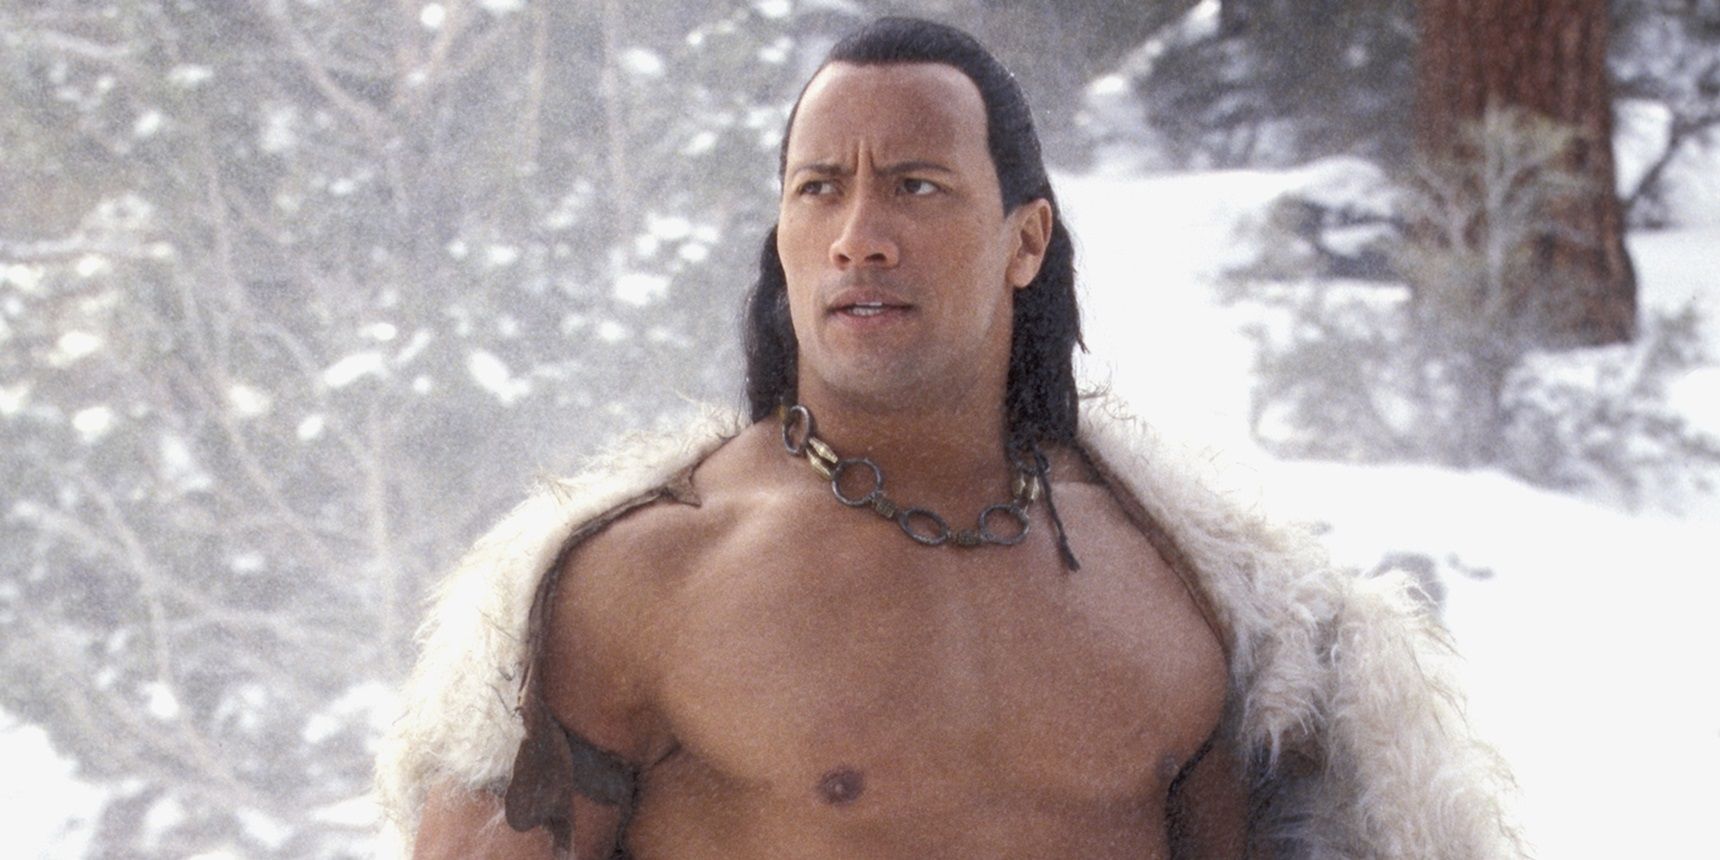 Dwayne Johnson in the snow in The Scorpion King